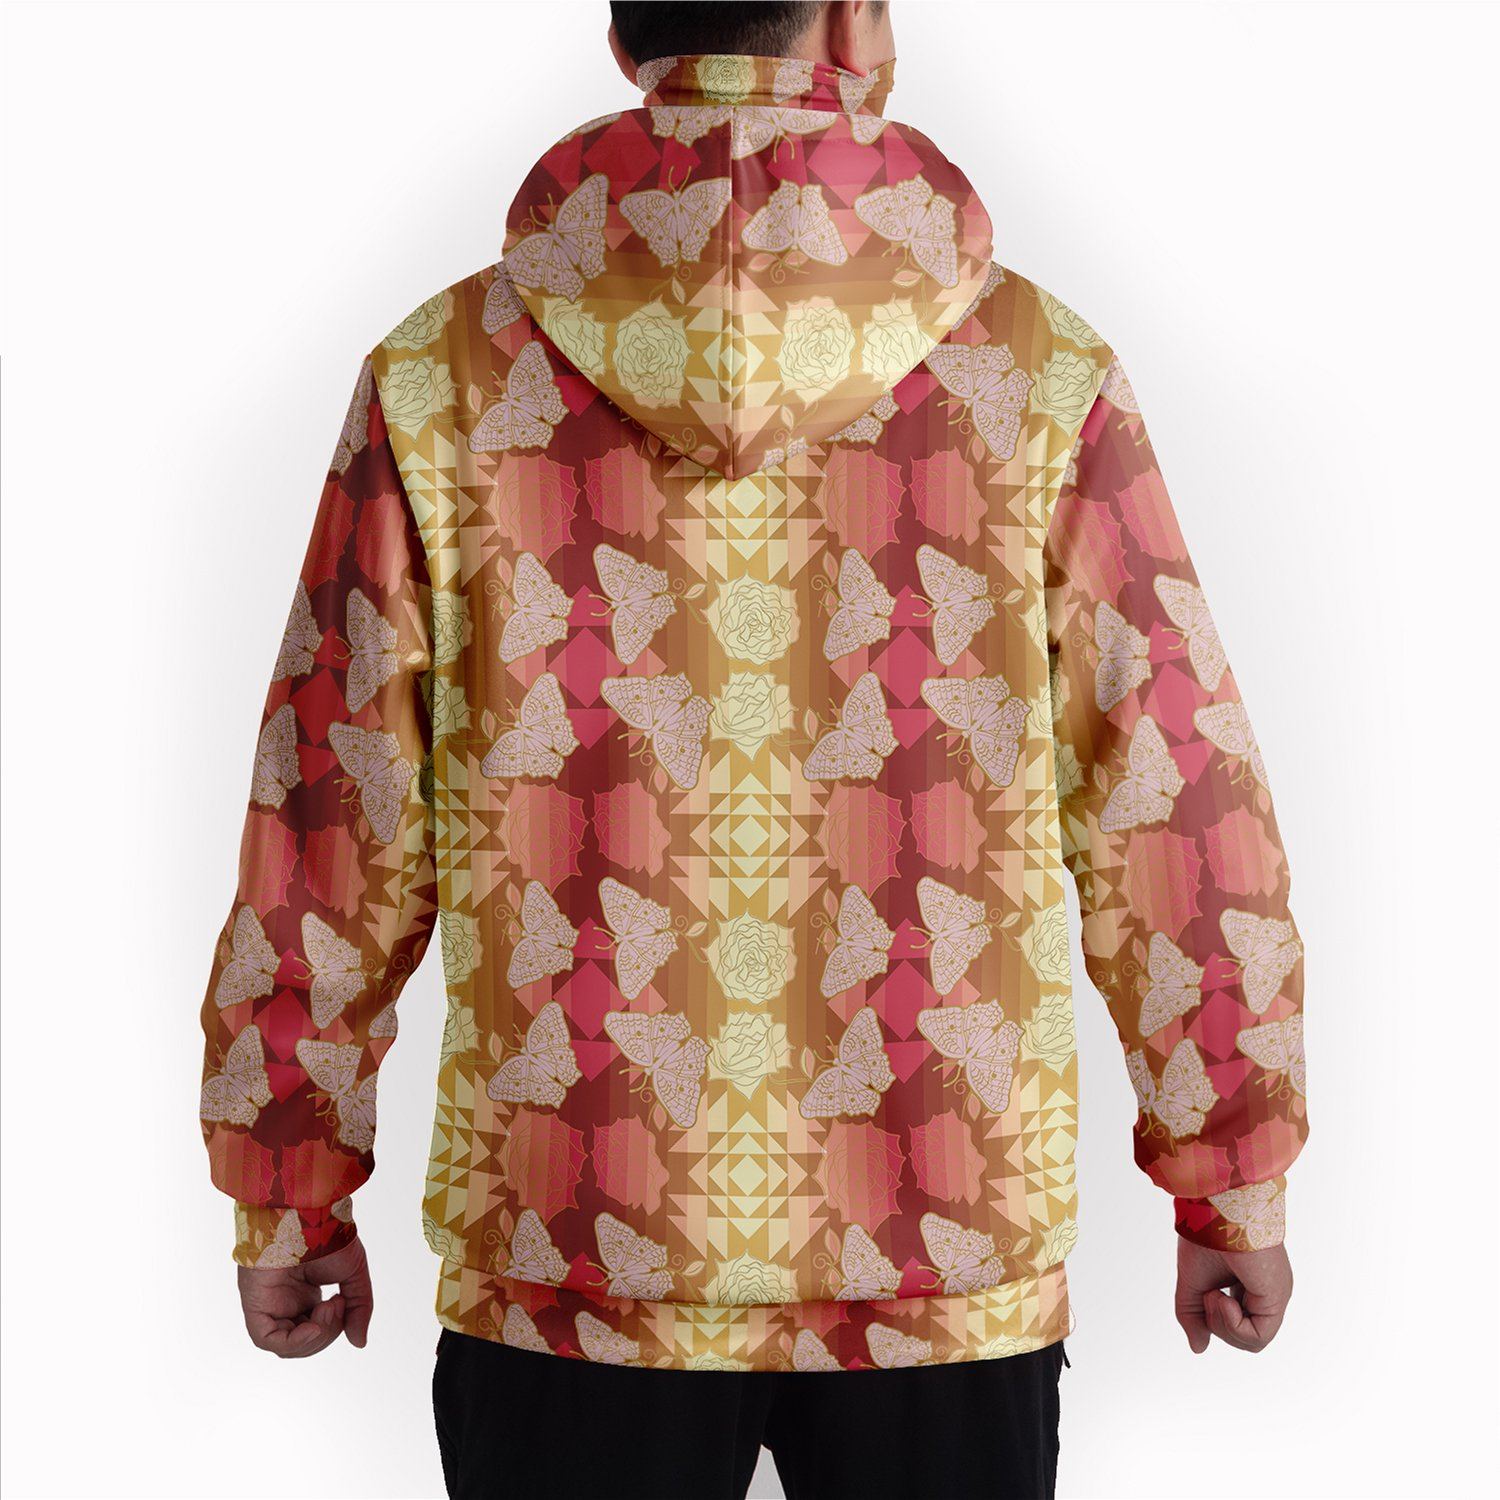 Butterfly and Roses on Geometric Hoodie with Face Cover 49 Dzine 